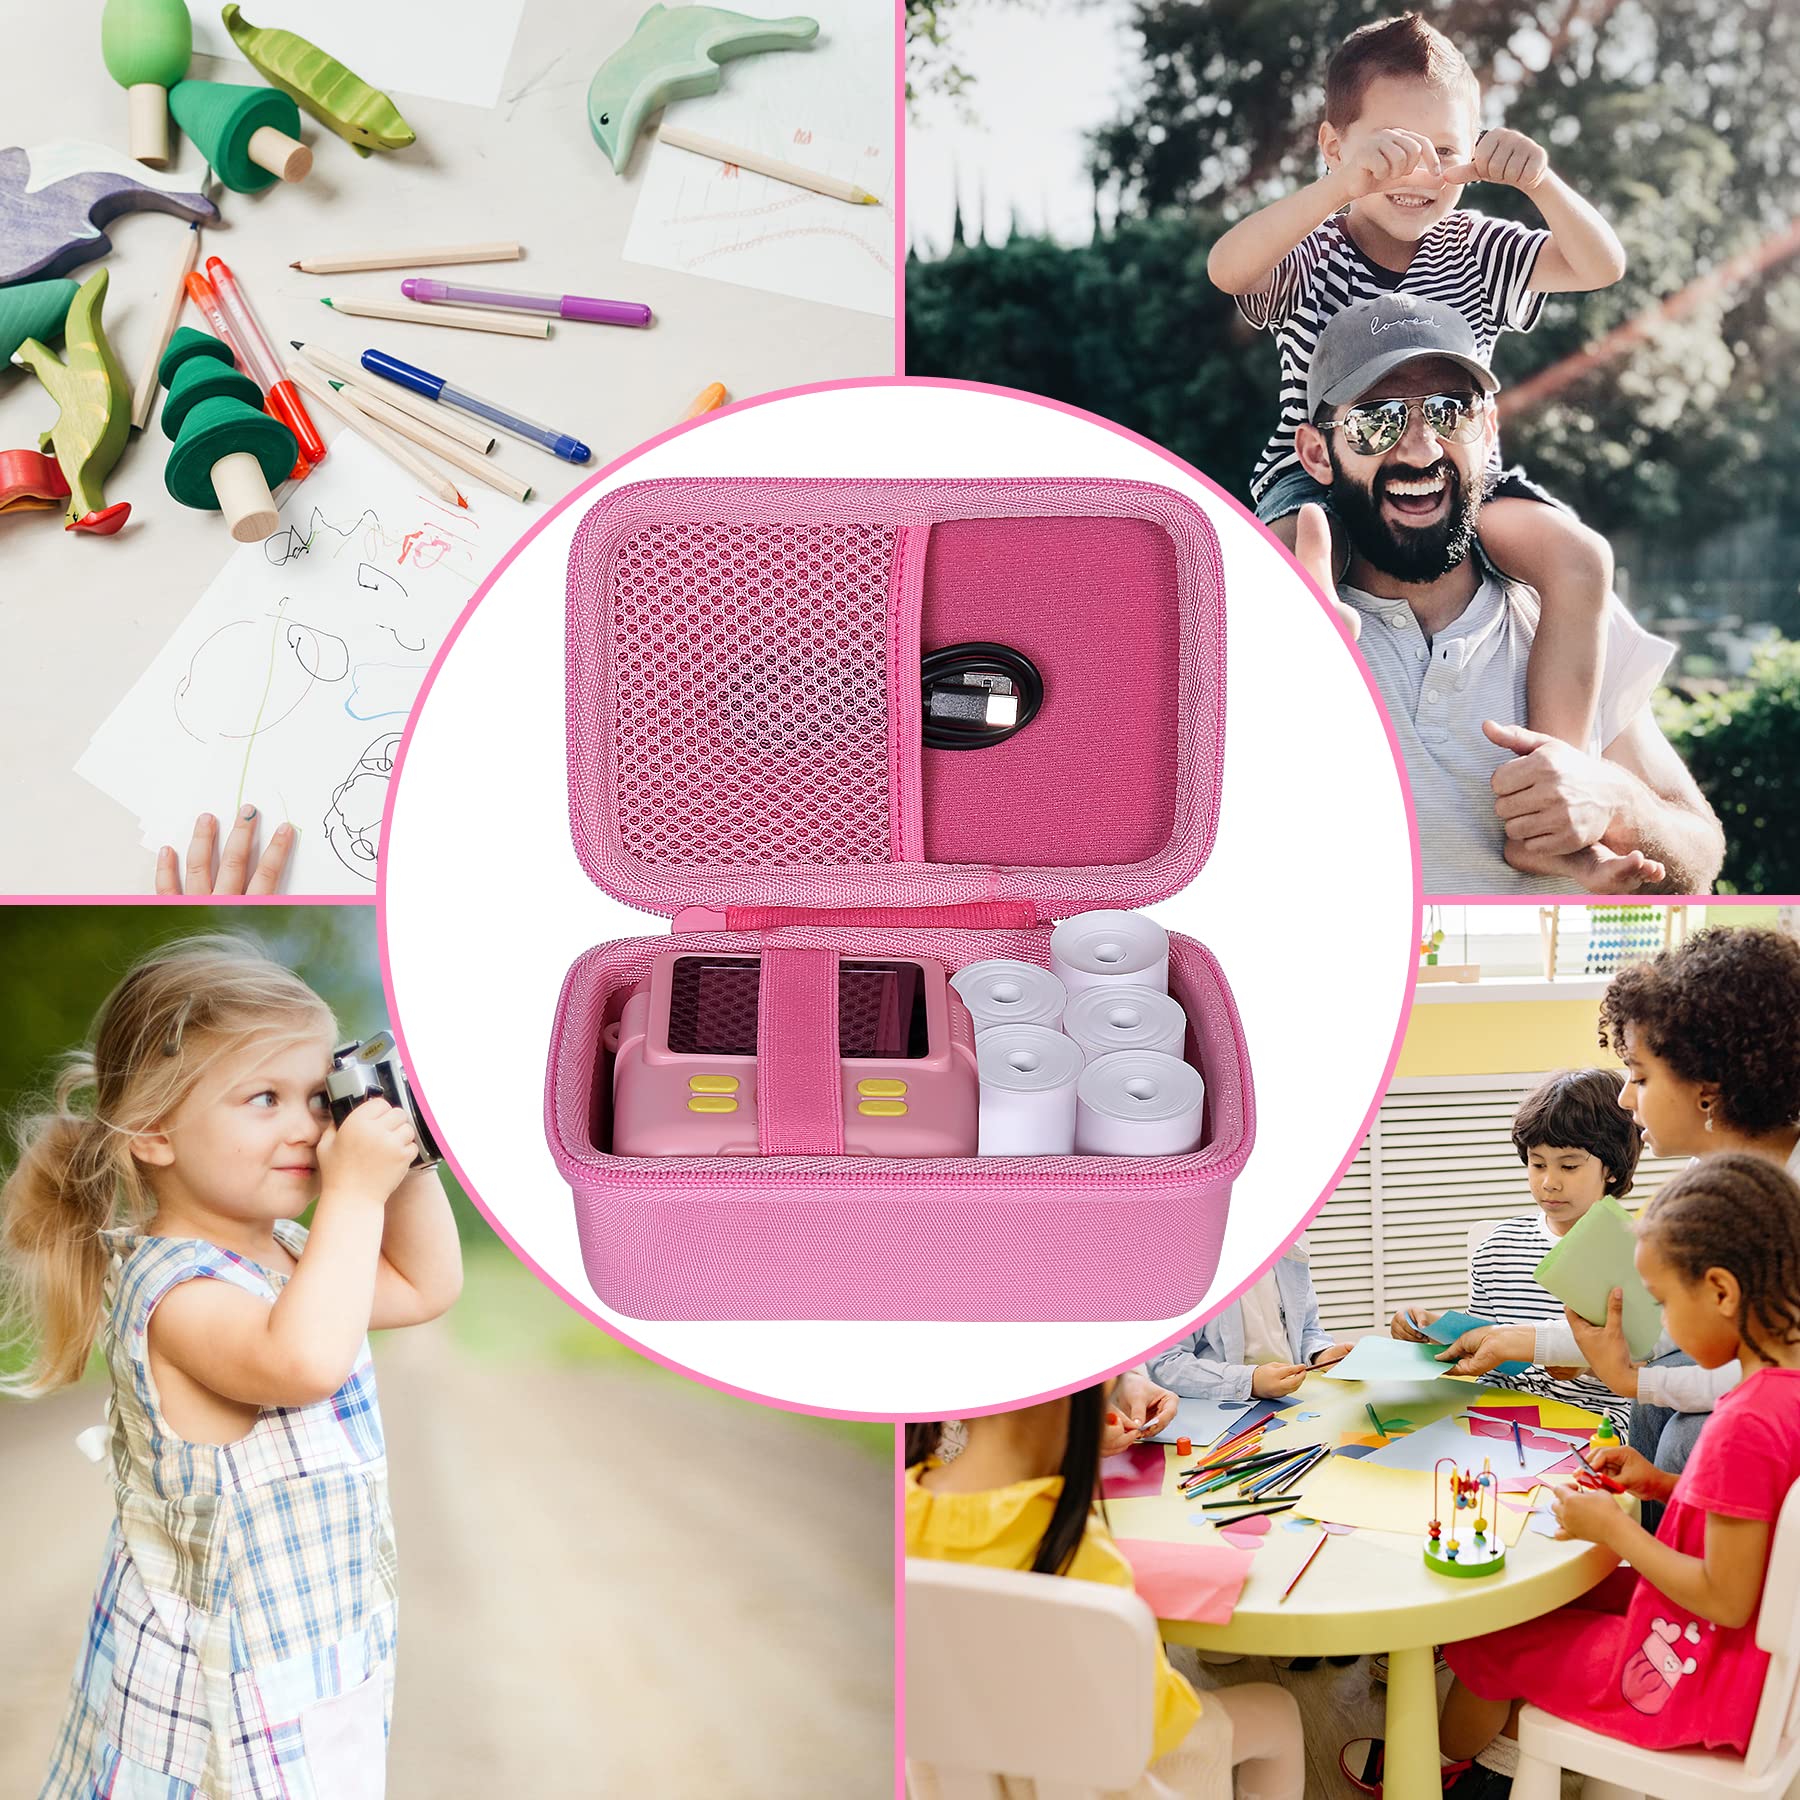 Aenllosi Kids Camera Case for Anchioo/for ESOXOFFORE Instant Print Camera Toys,Kids Selfie Digital Camera Photo Paper & Color Pen Holder (Pink,Case Only)